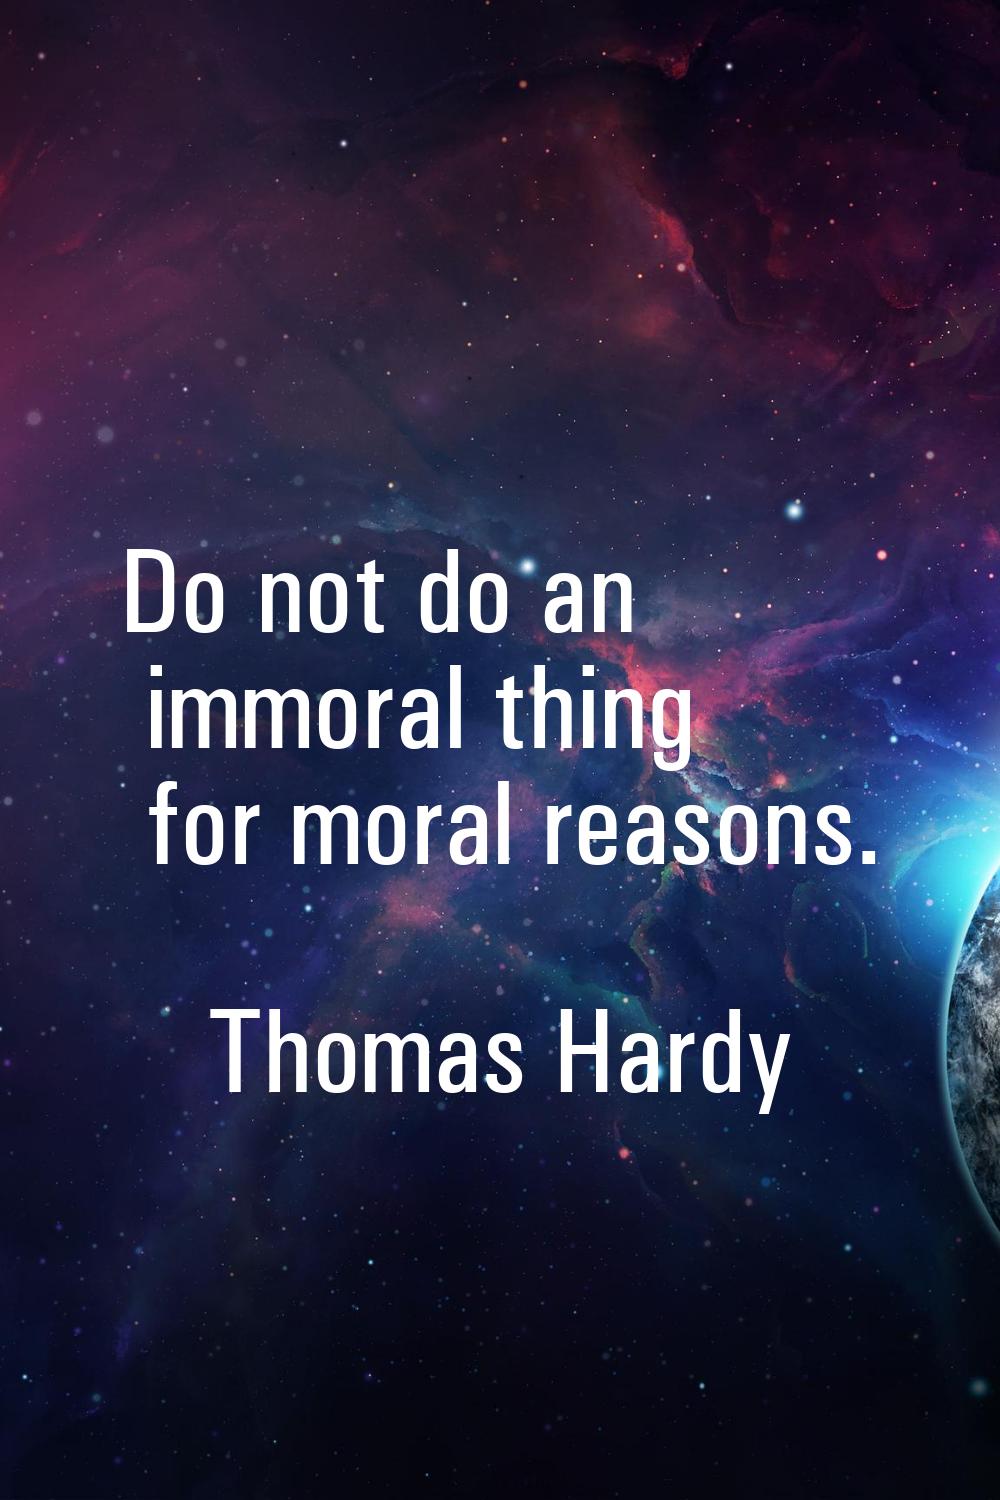 Do not do an immoral thing for moral reasons.